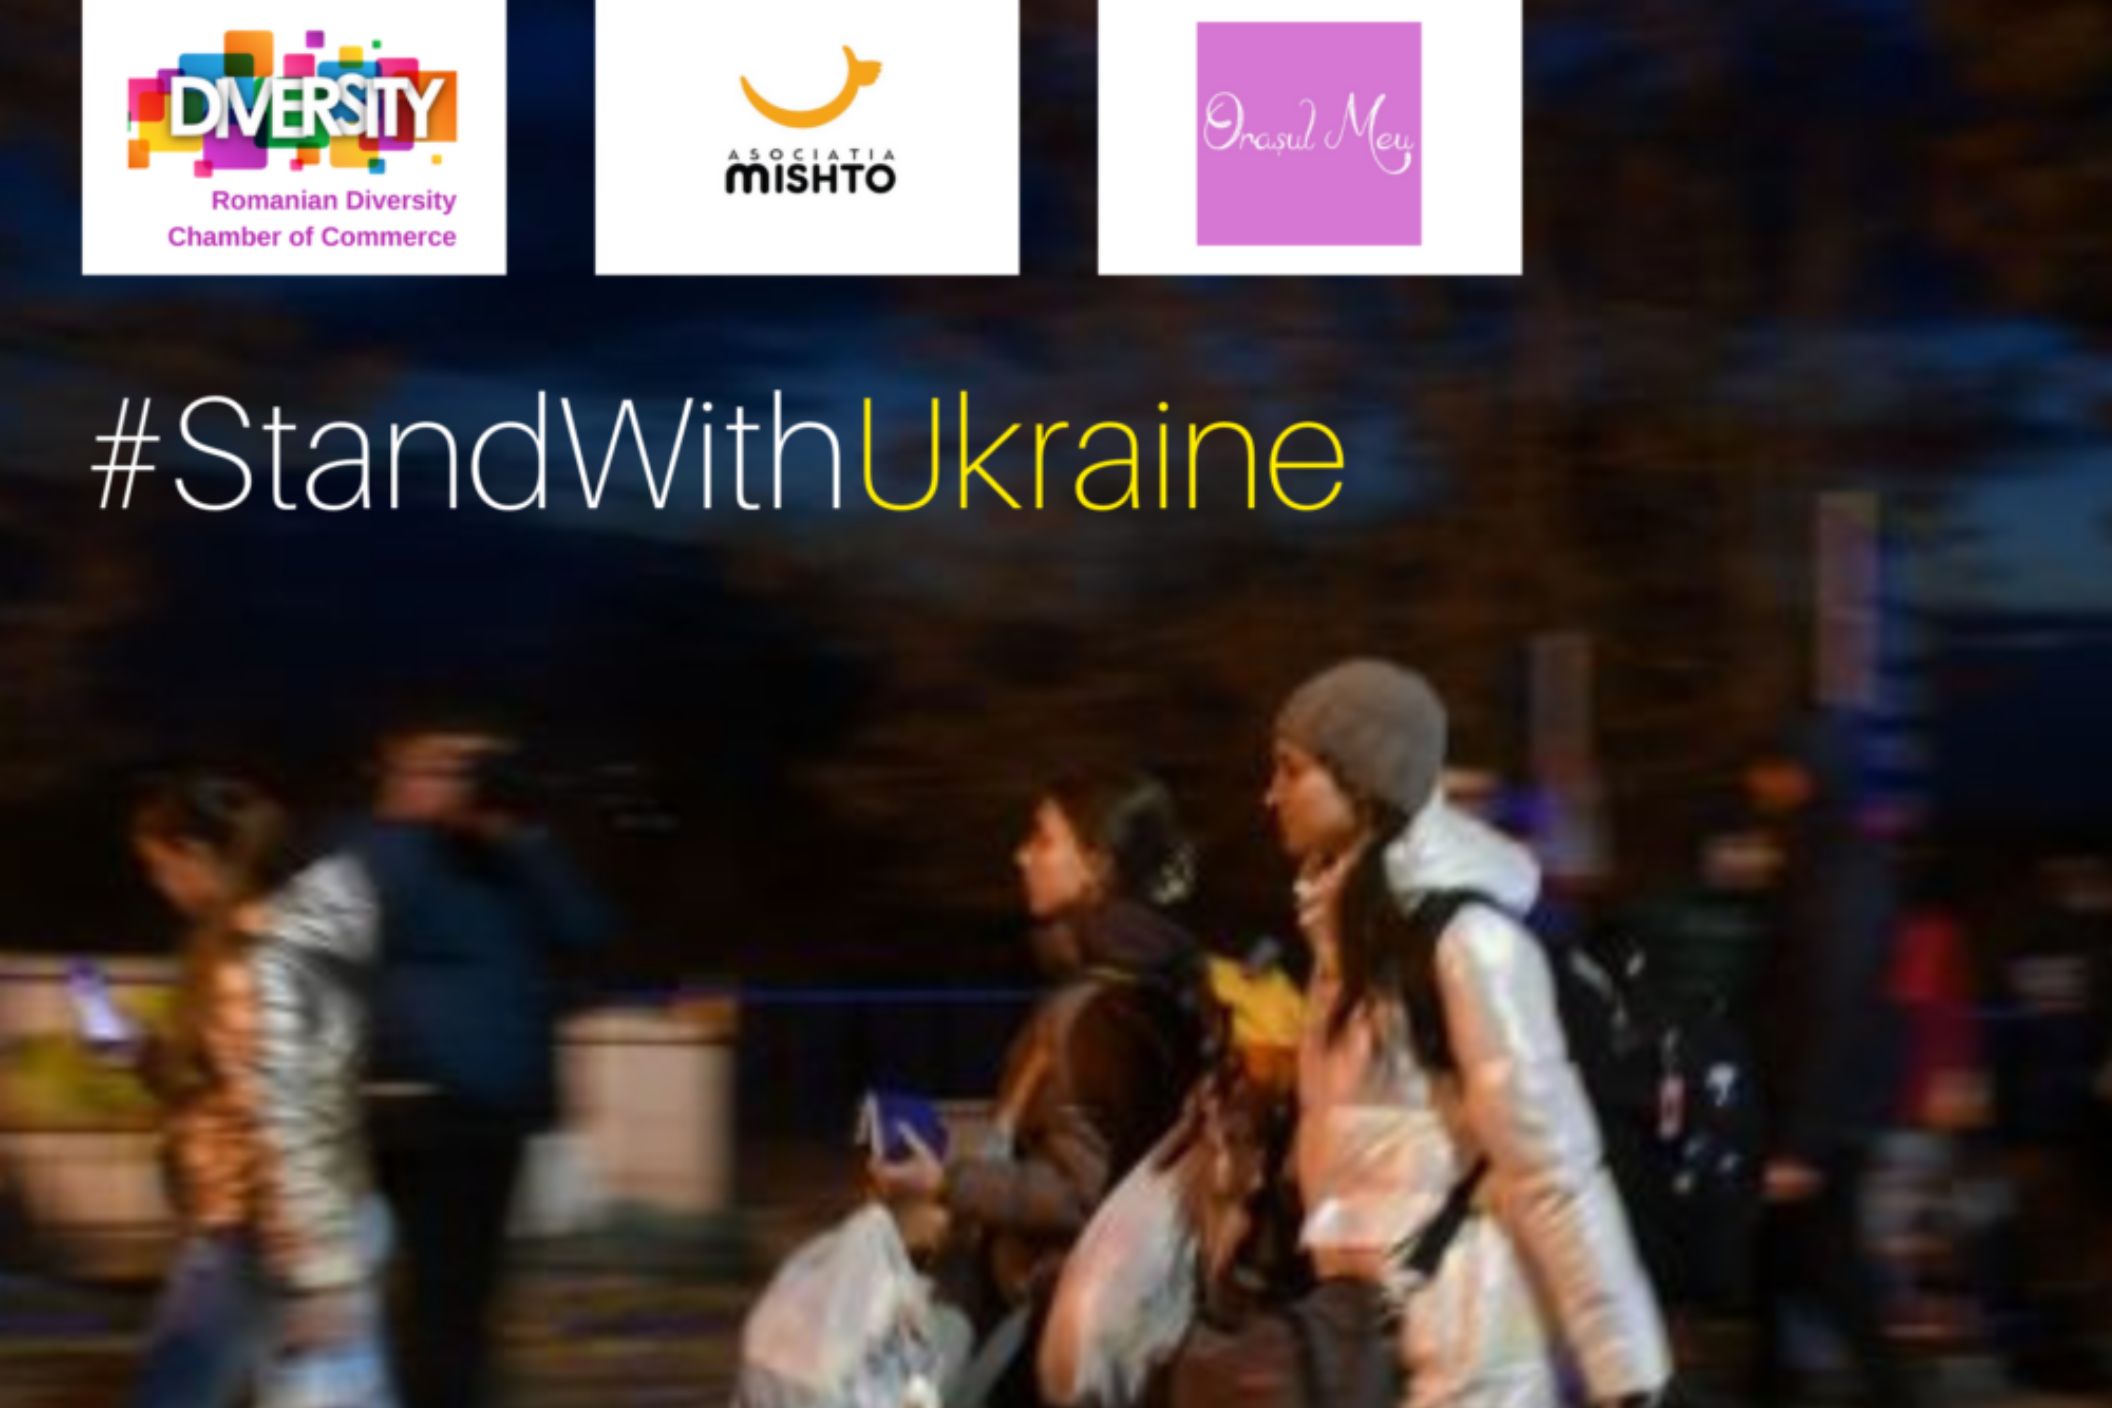 RDCC will stand by Ukraine and its people during recent events.